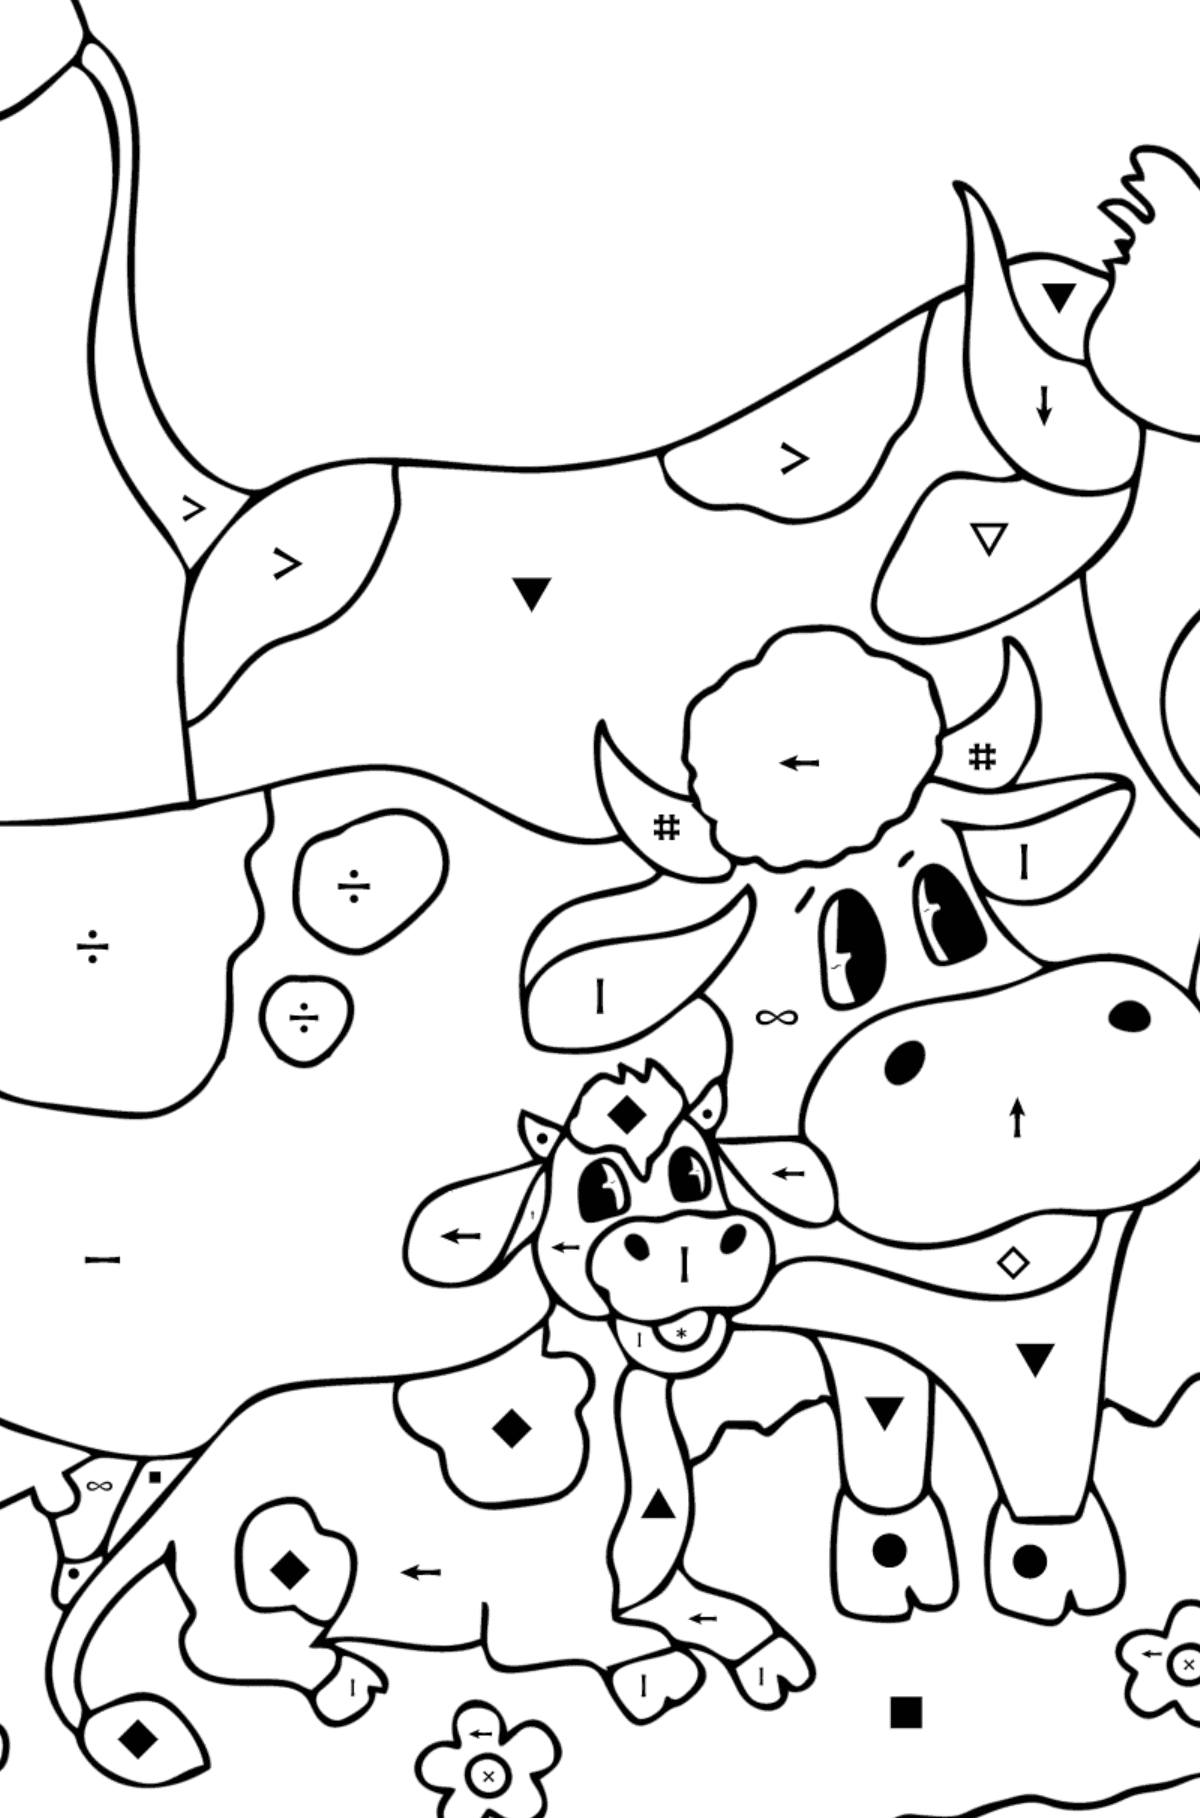 Cow, bull and calf coloring page - Coloring by Symbols for Kids